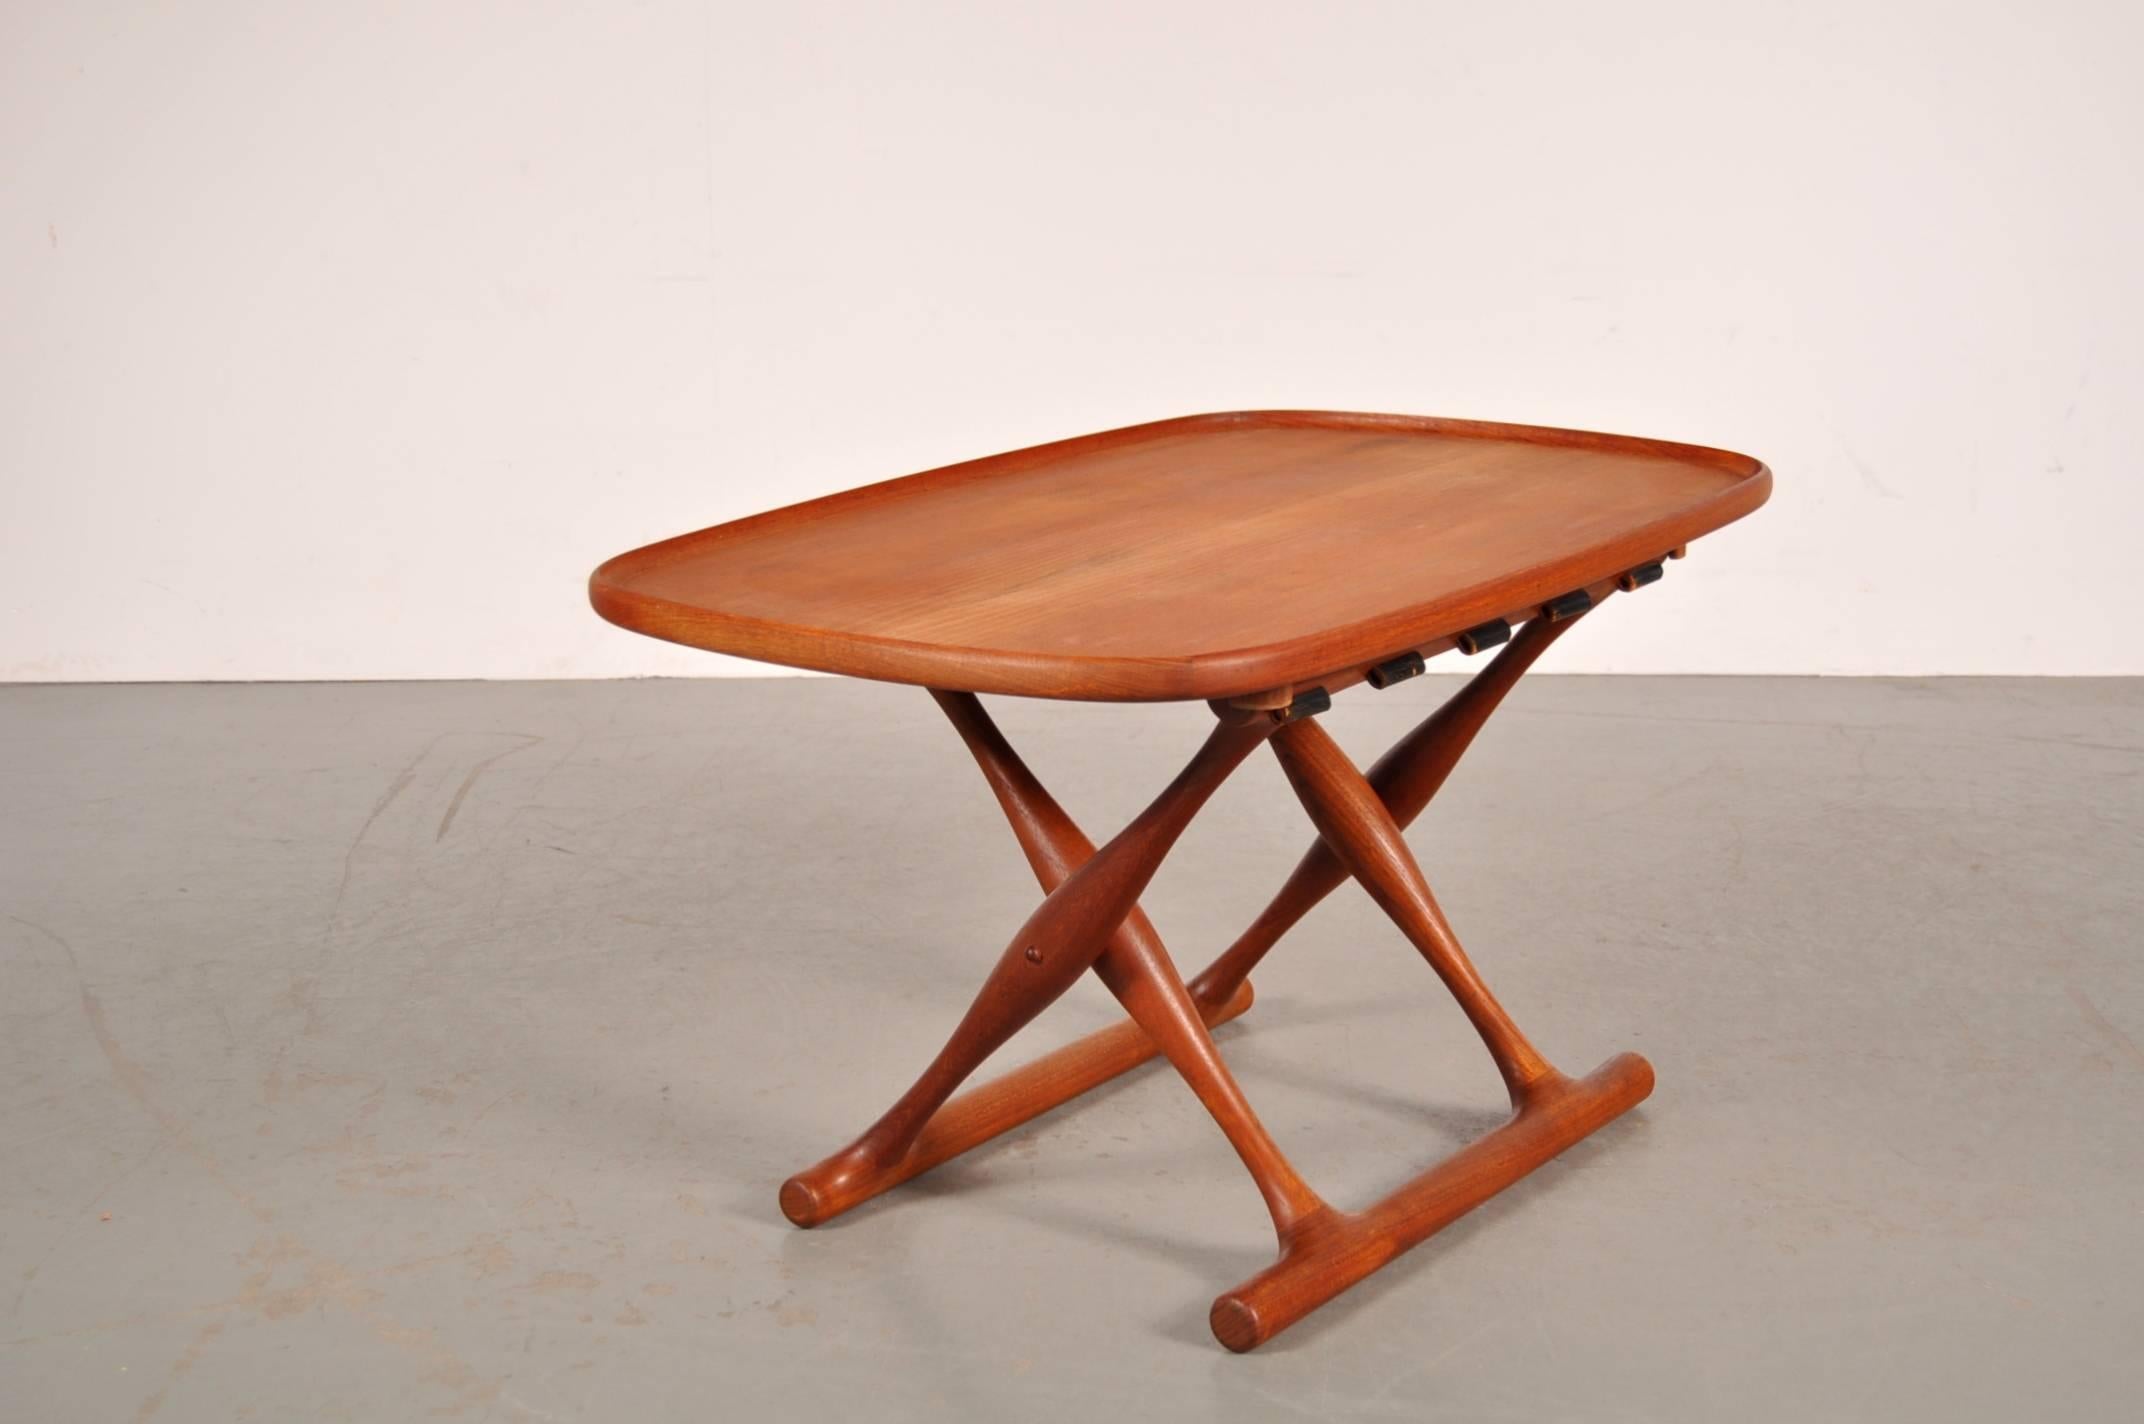 Beautiful folding stool with matching tray designed by Poul Hundevad for Domus Danica in Vamdrup, Denmark, circa 1950.

The stool is made from amazing quality teak wood with a thick, strong black leather upholstery. The leather is beautifuly